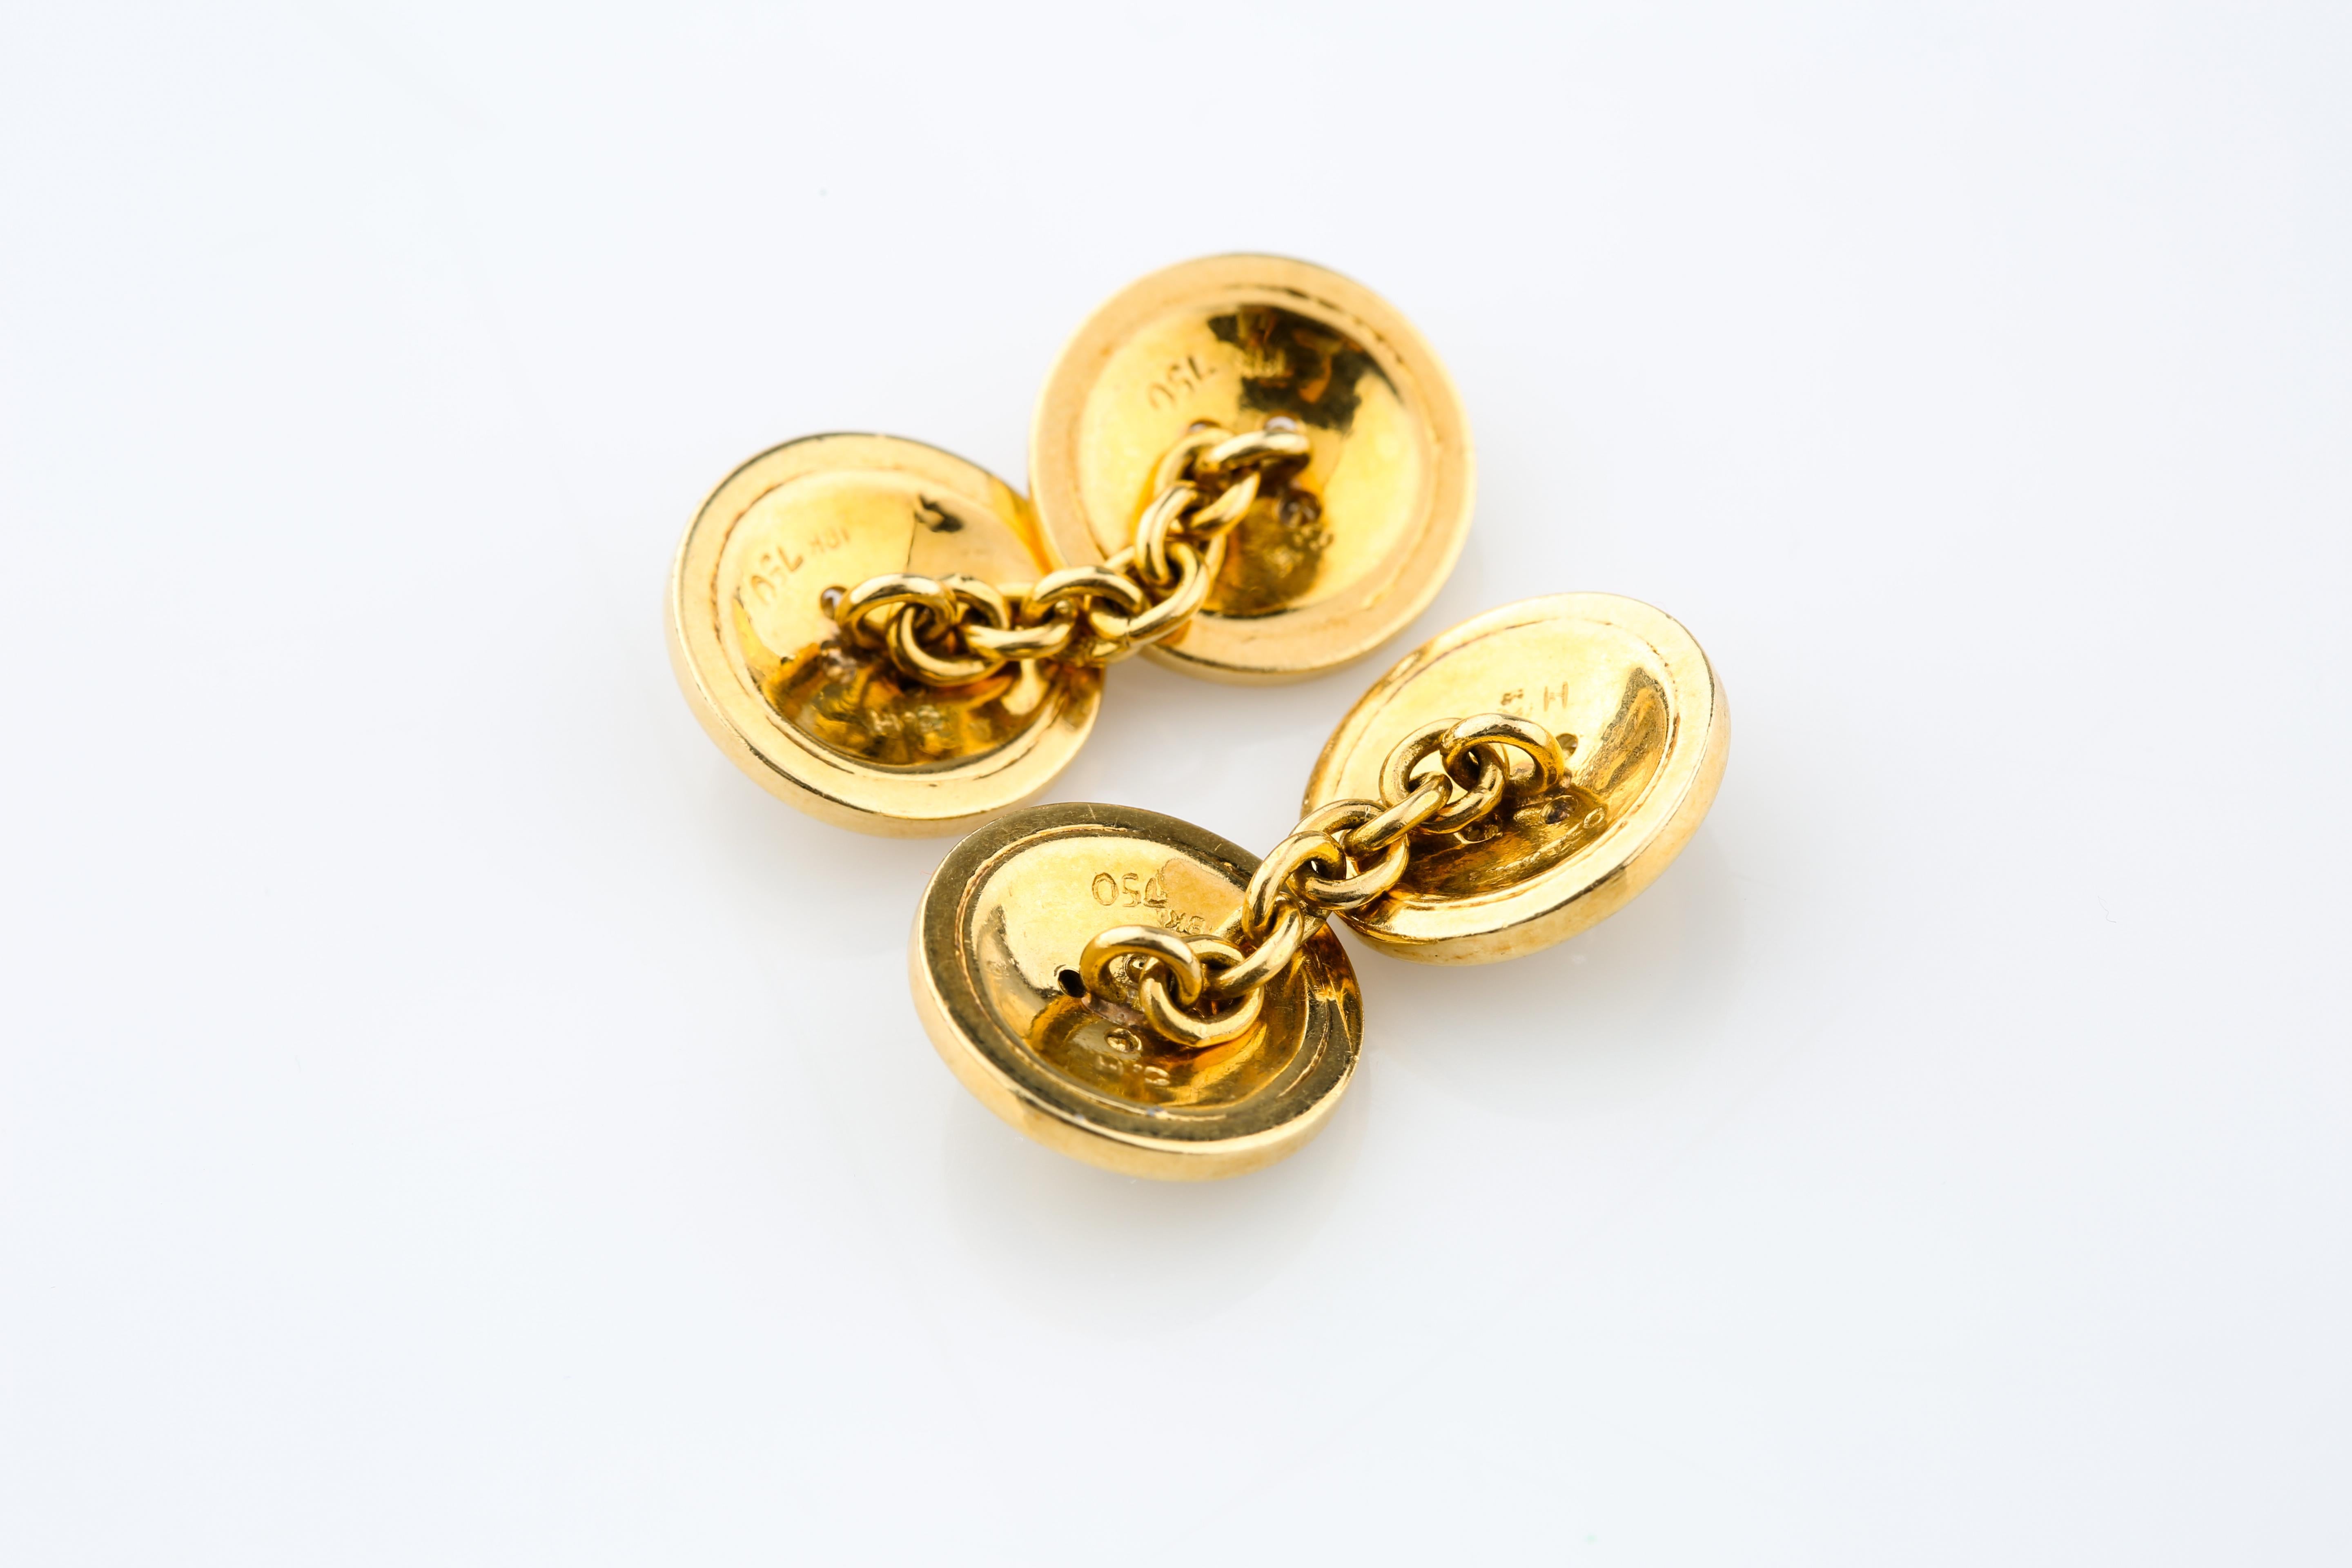 750 Yellow Gold Cufflinks
Each Button 13 mm in Diameter
Total Mass = 12.7 Grams
Each Engraved with 